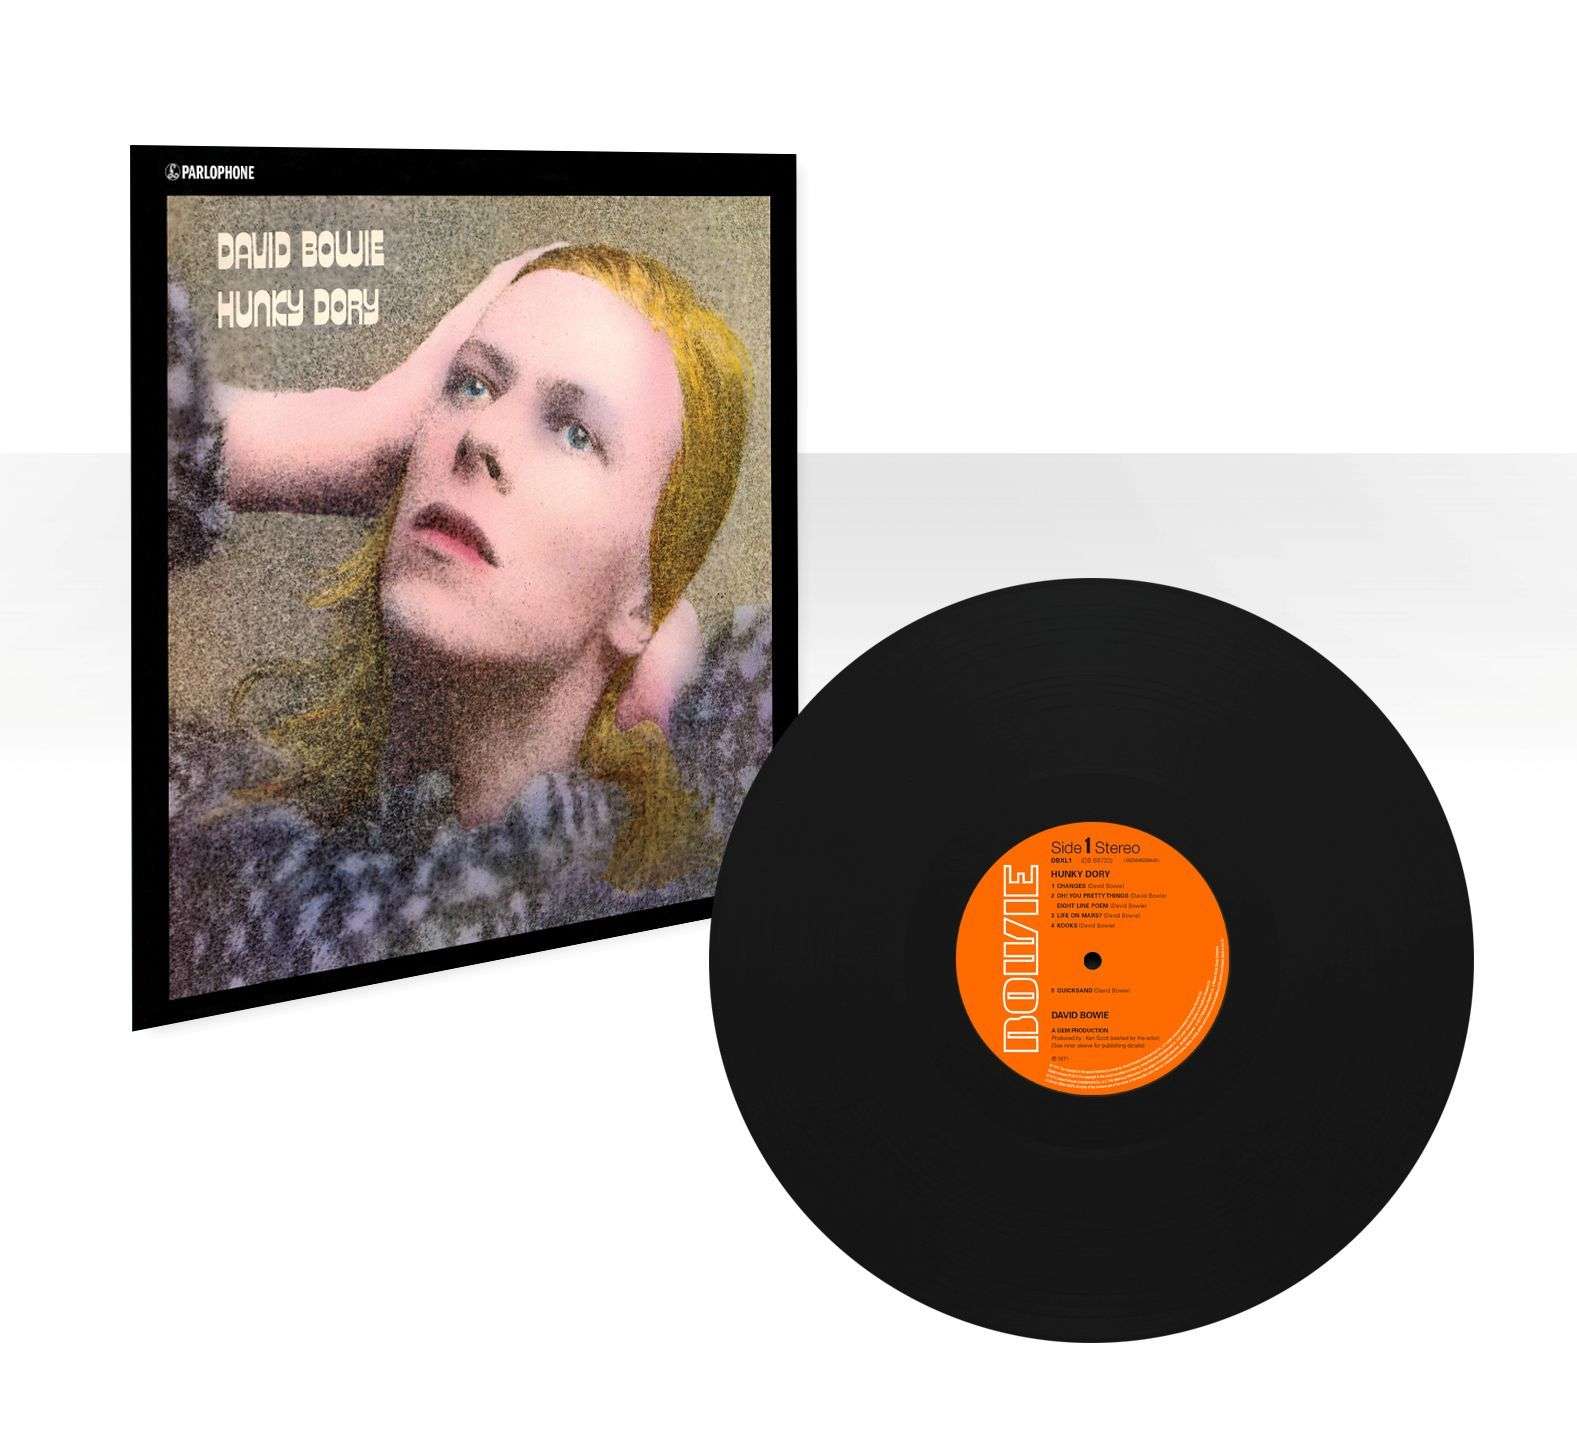 David Bowie - Hunky Dory - 33RPM